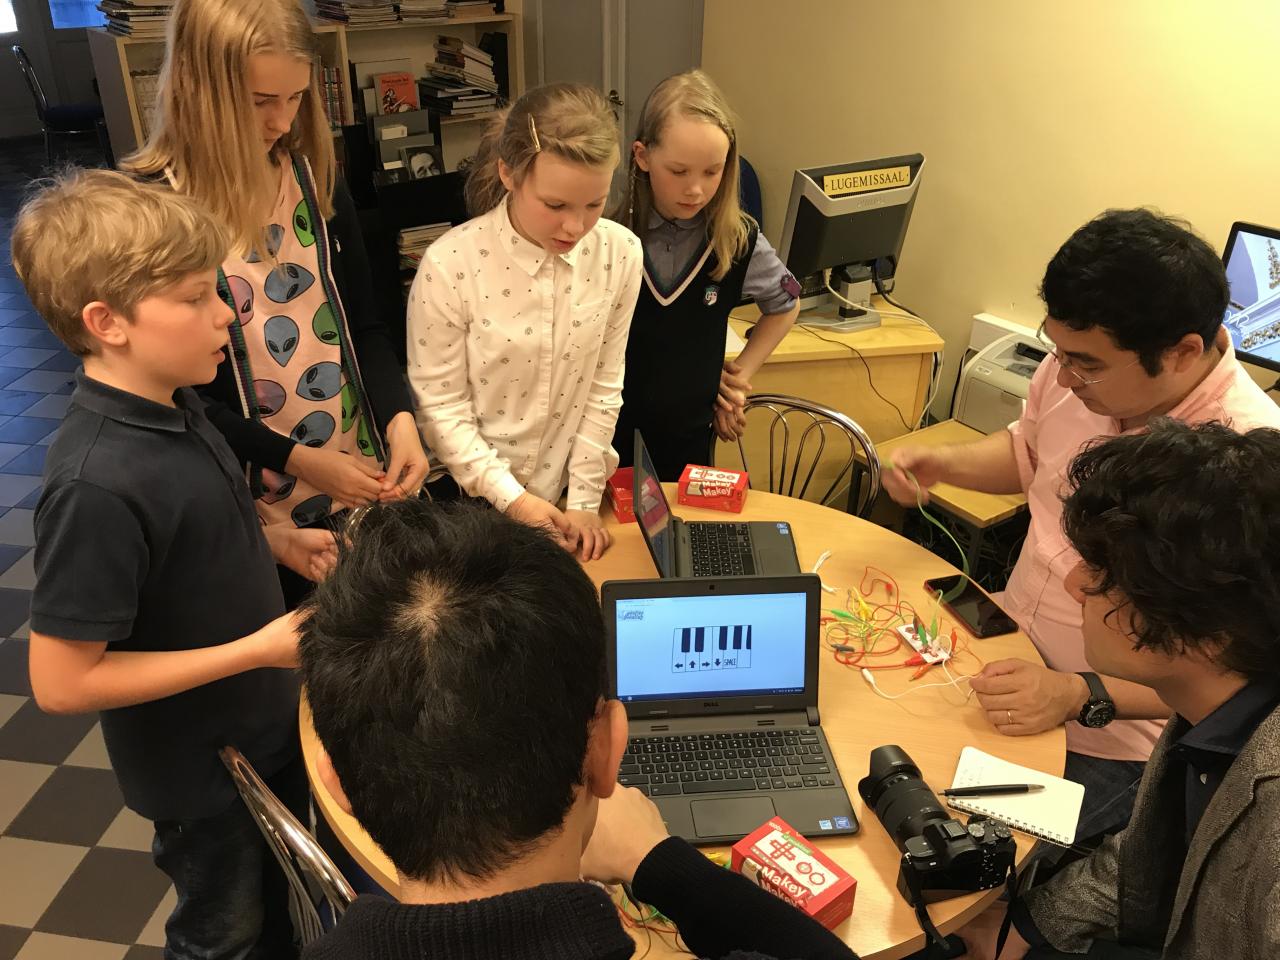 A group of students play with wires connected to laptops